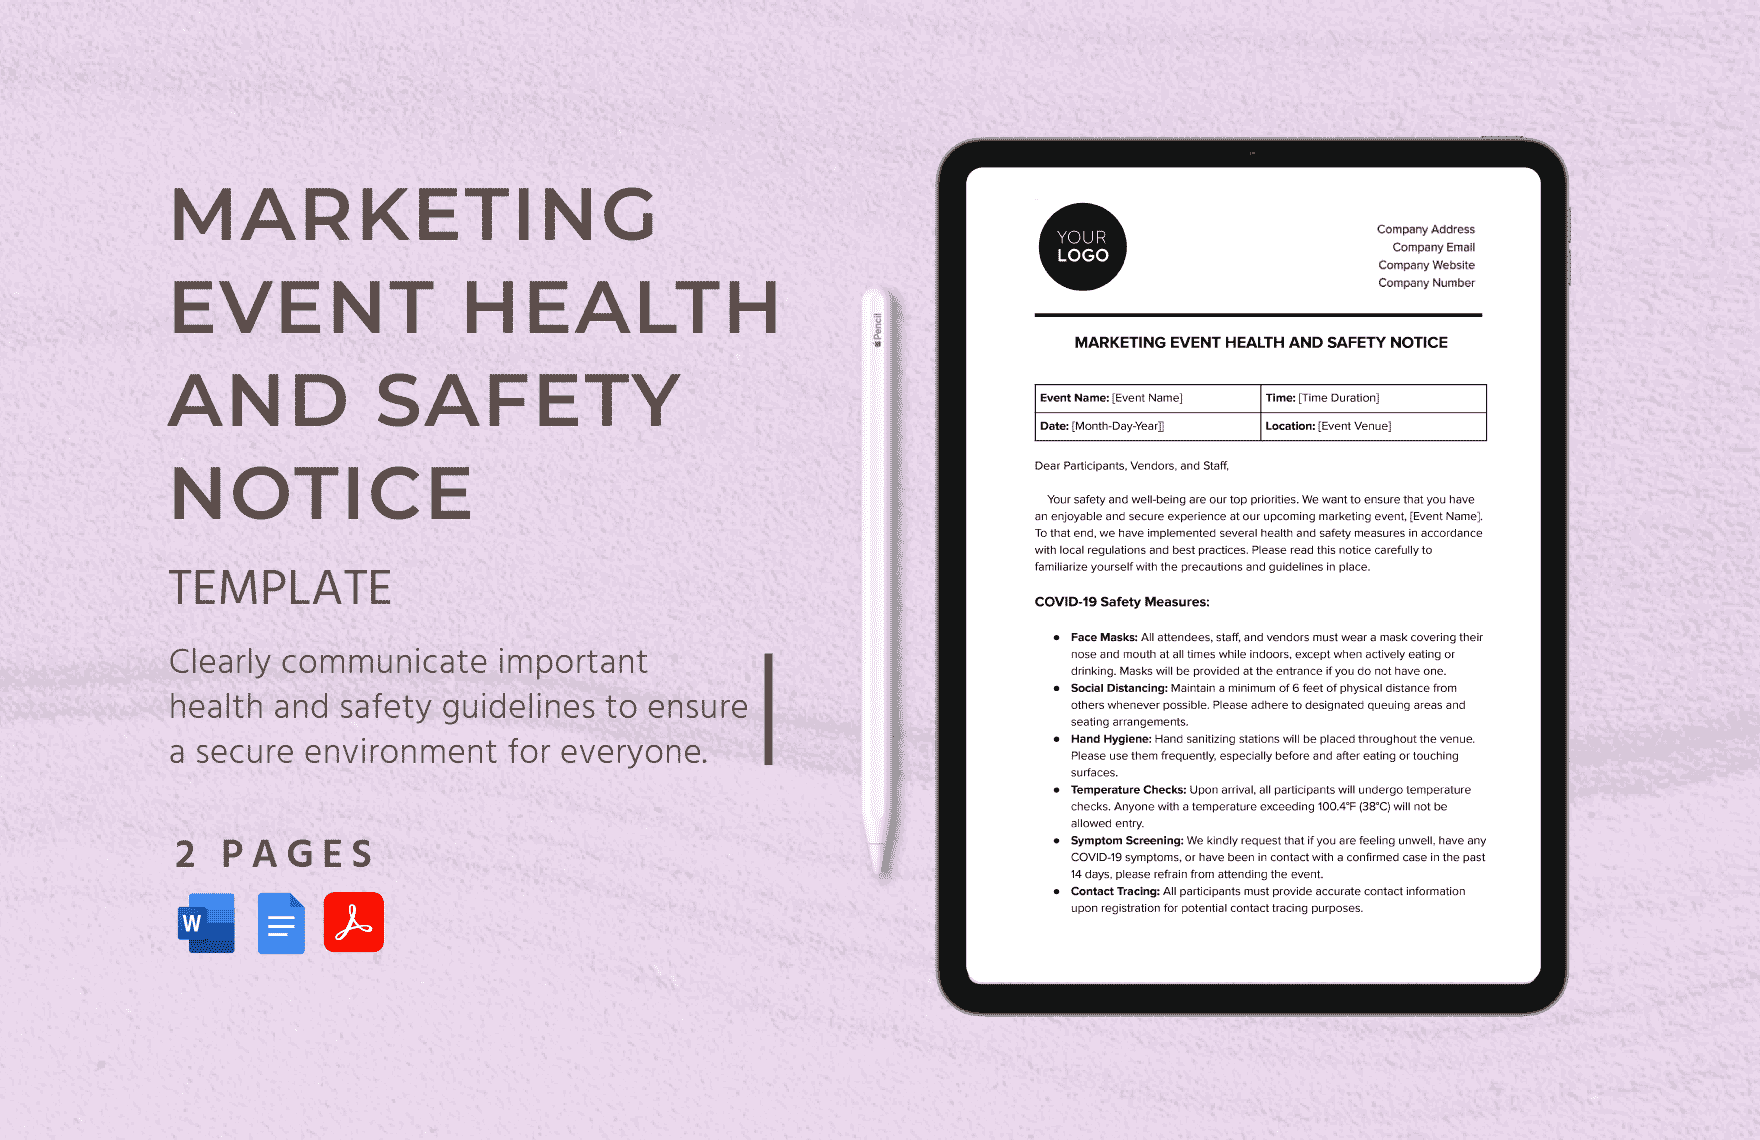 Marketing Event Health and Safety Notice Template